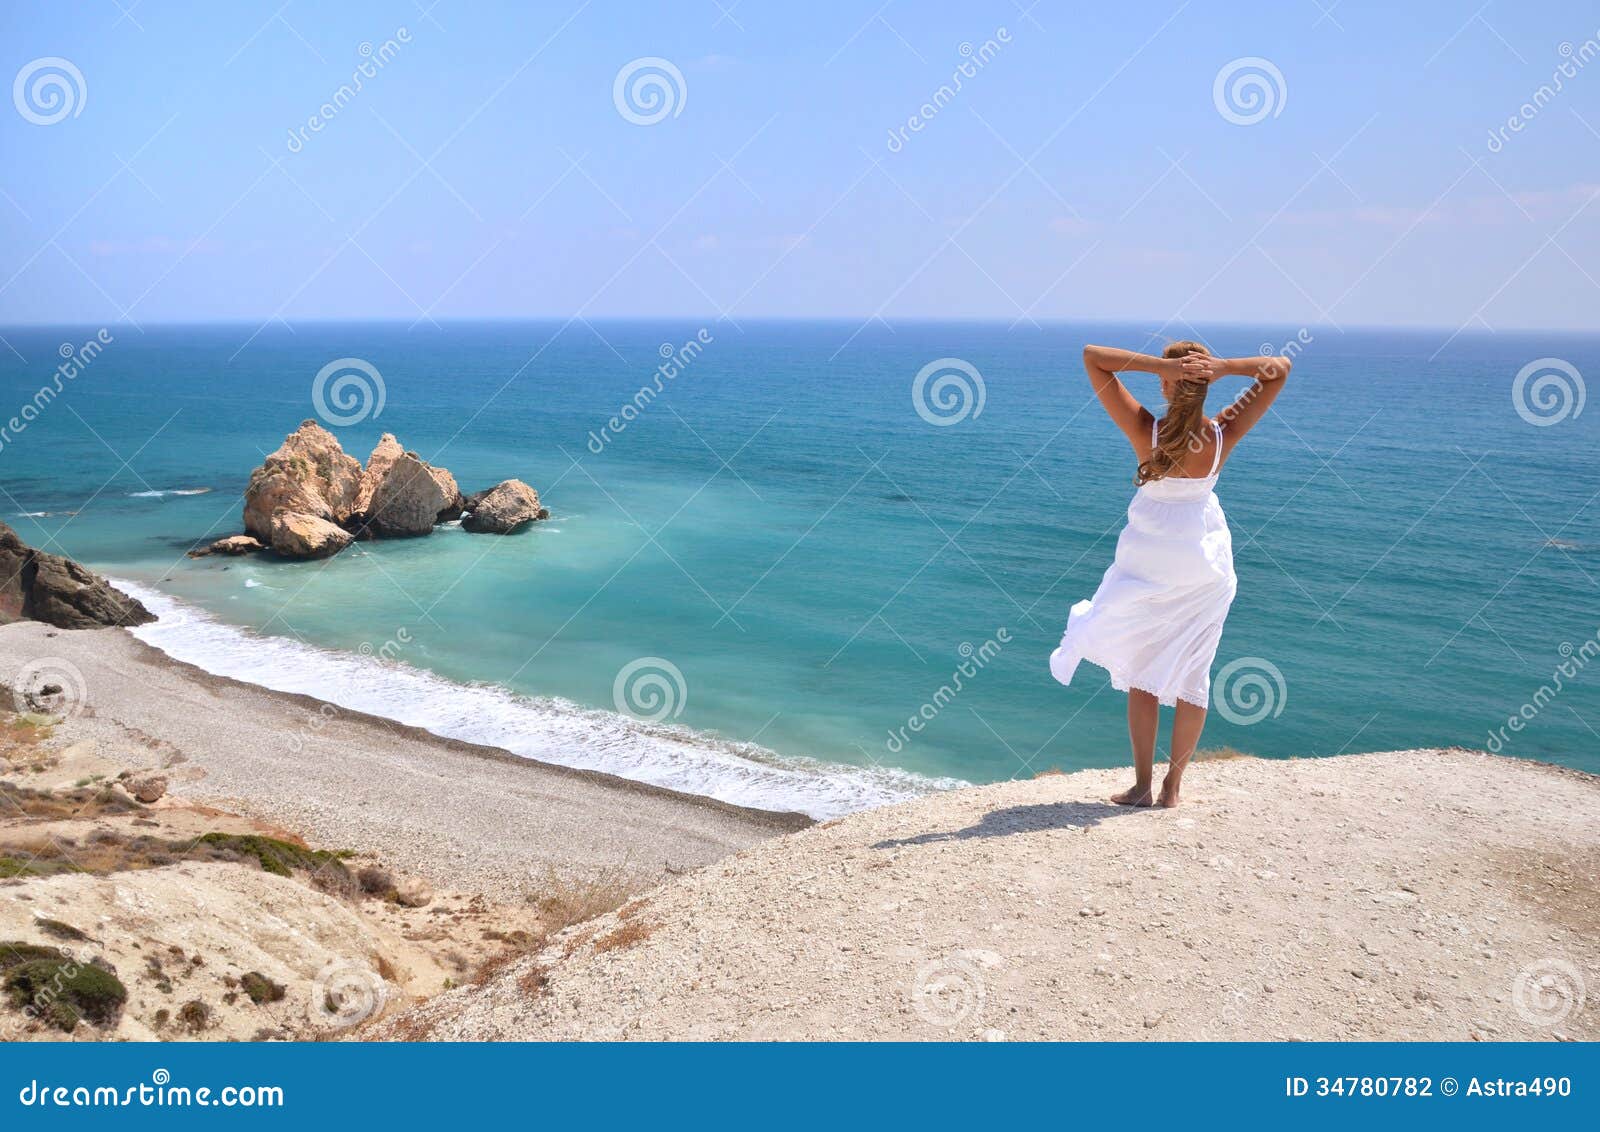 girl looking to the sea, cyprus